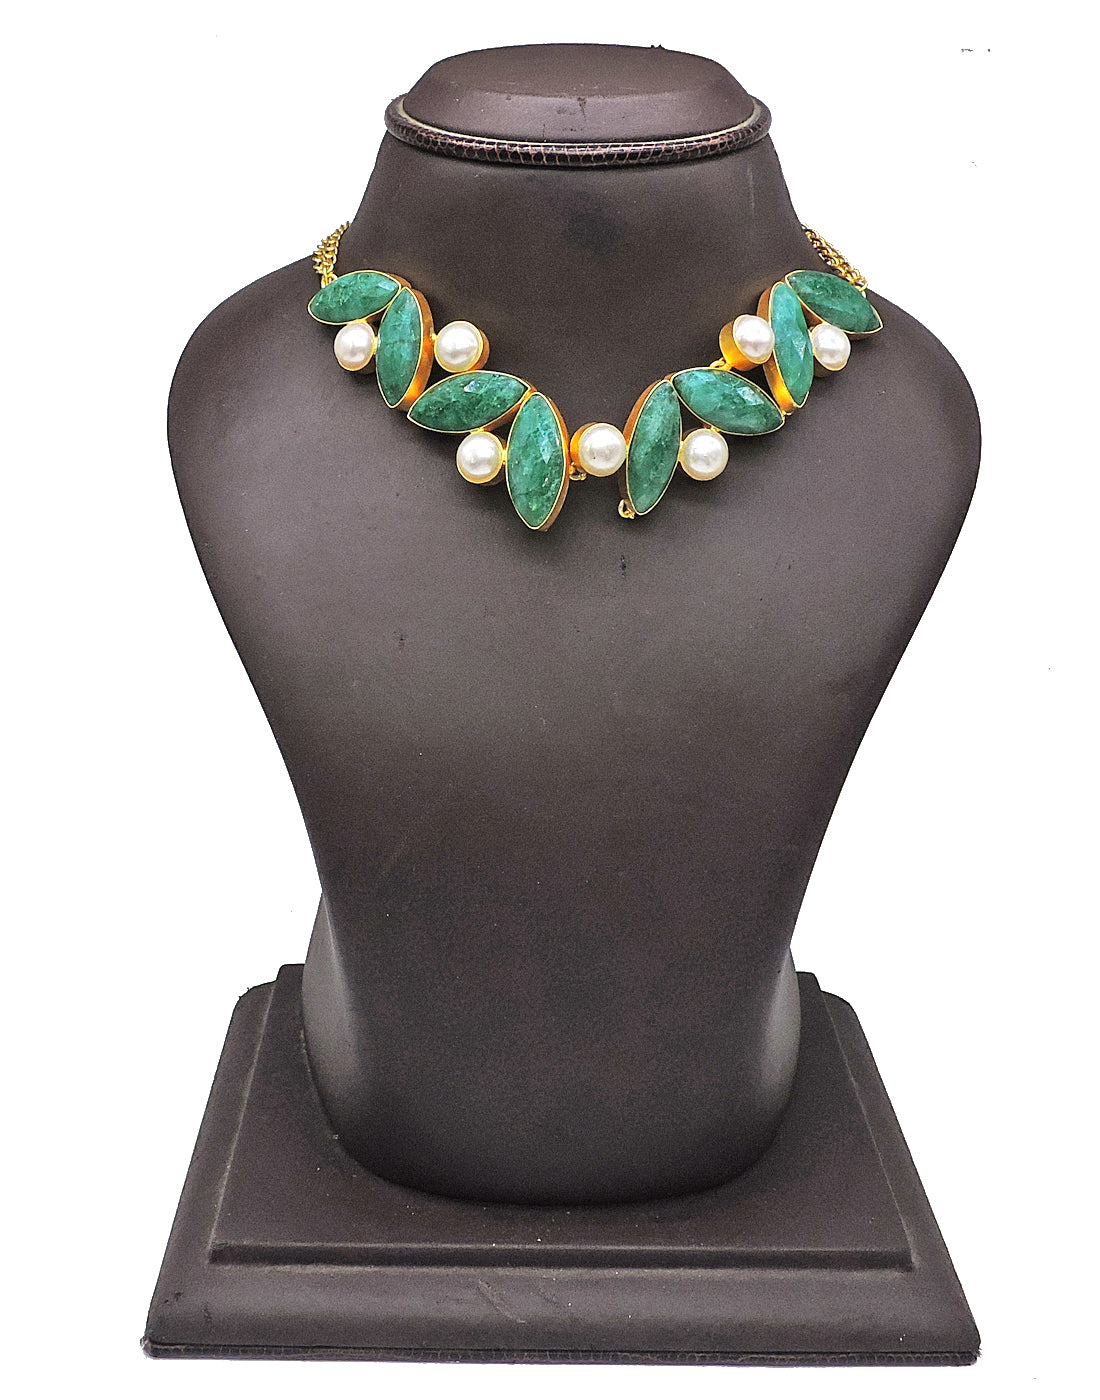 Green Haathi & Pearl Necklace - Statement Necklaces - Gold-Plated & Hypoallergenic Jewellery - Made in India - Dubai Jewellery - Dori